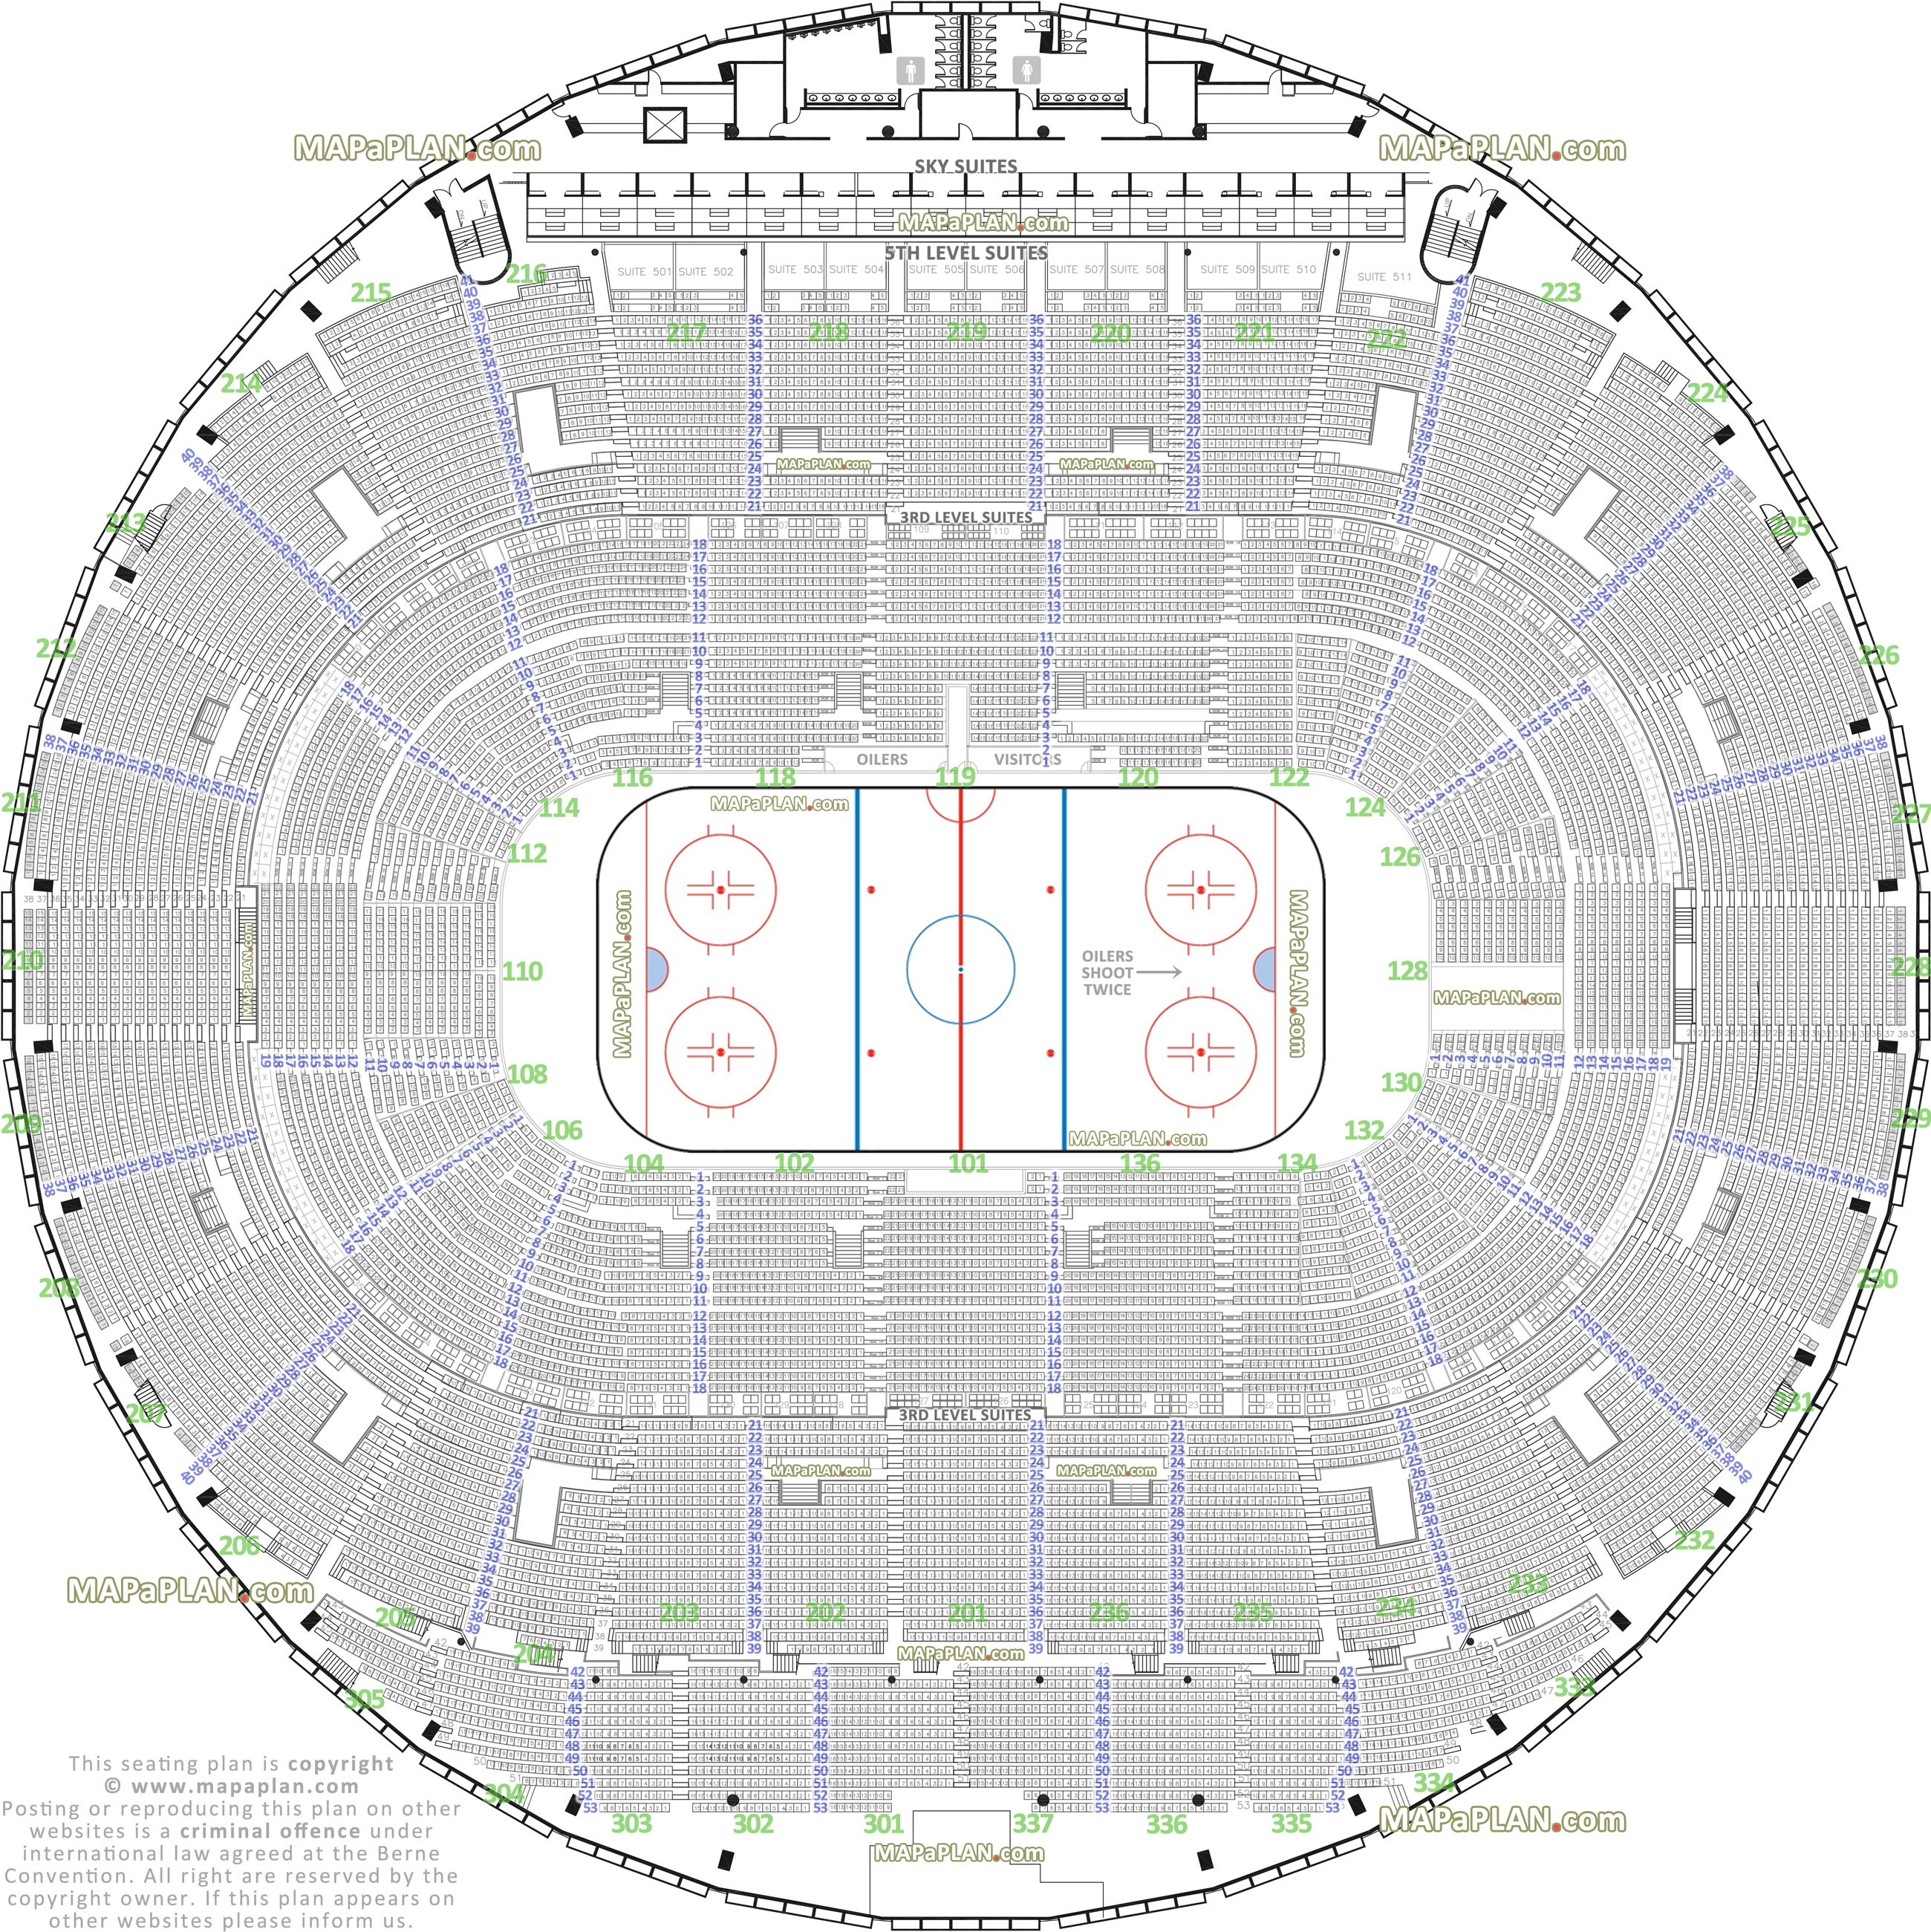 edmonton oilers nhl oil kings ice hockey game rink exact venue map with gold silver club executive terrace colonnade gallery box suites individual seat finder Edmonton Rexall Place seating chart